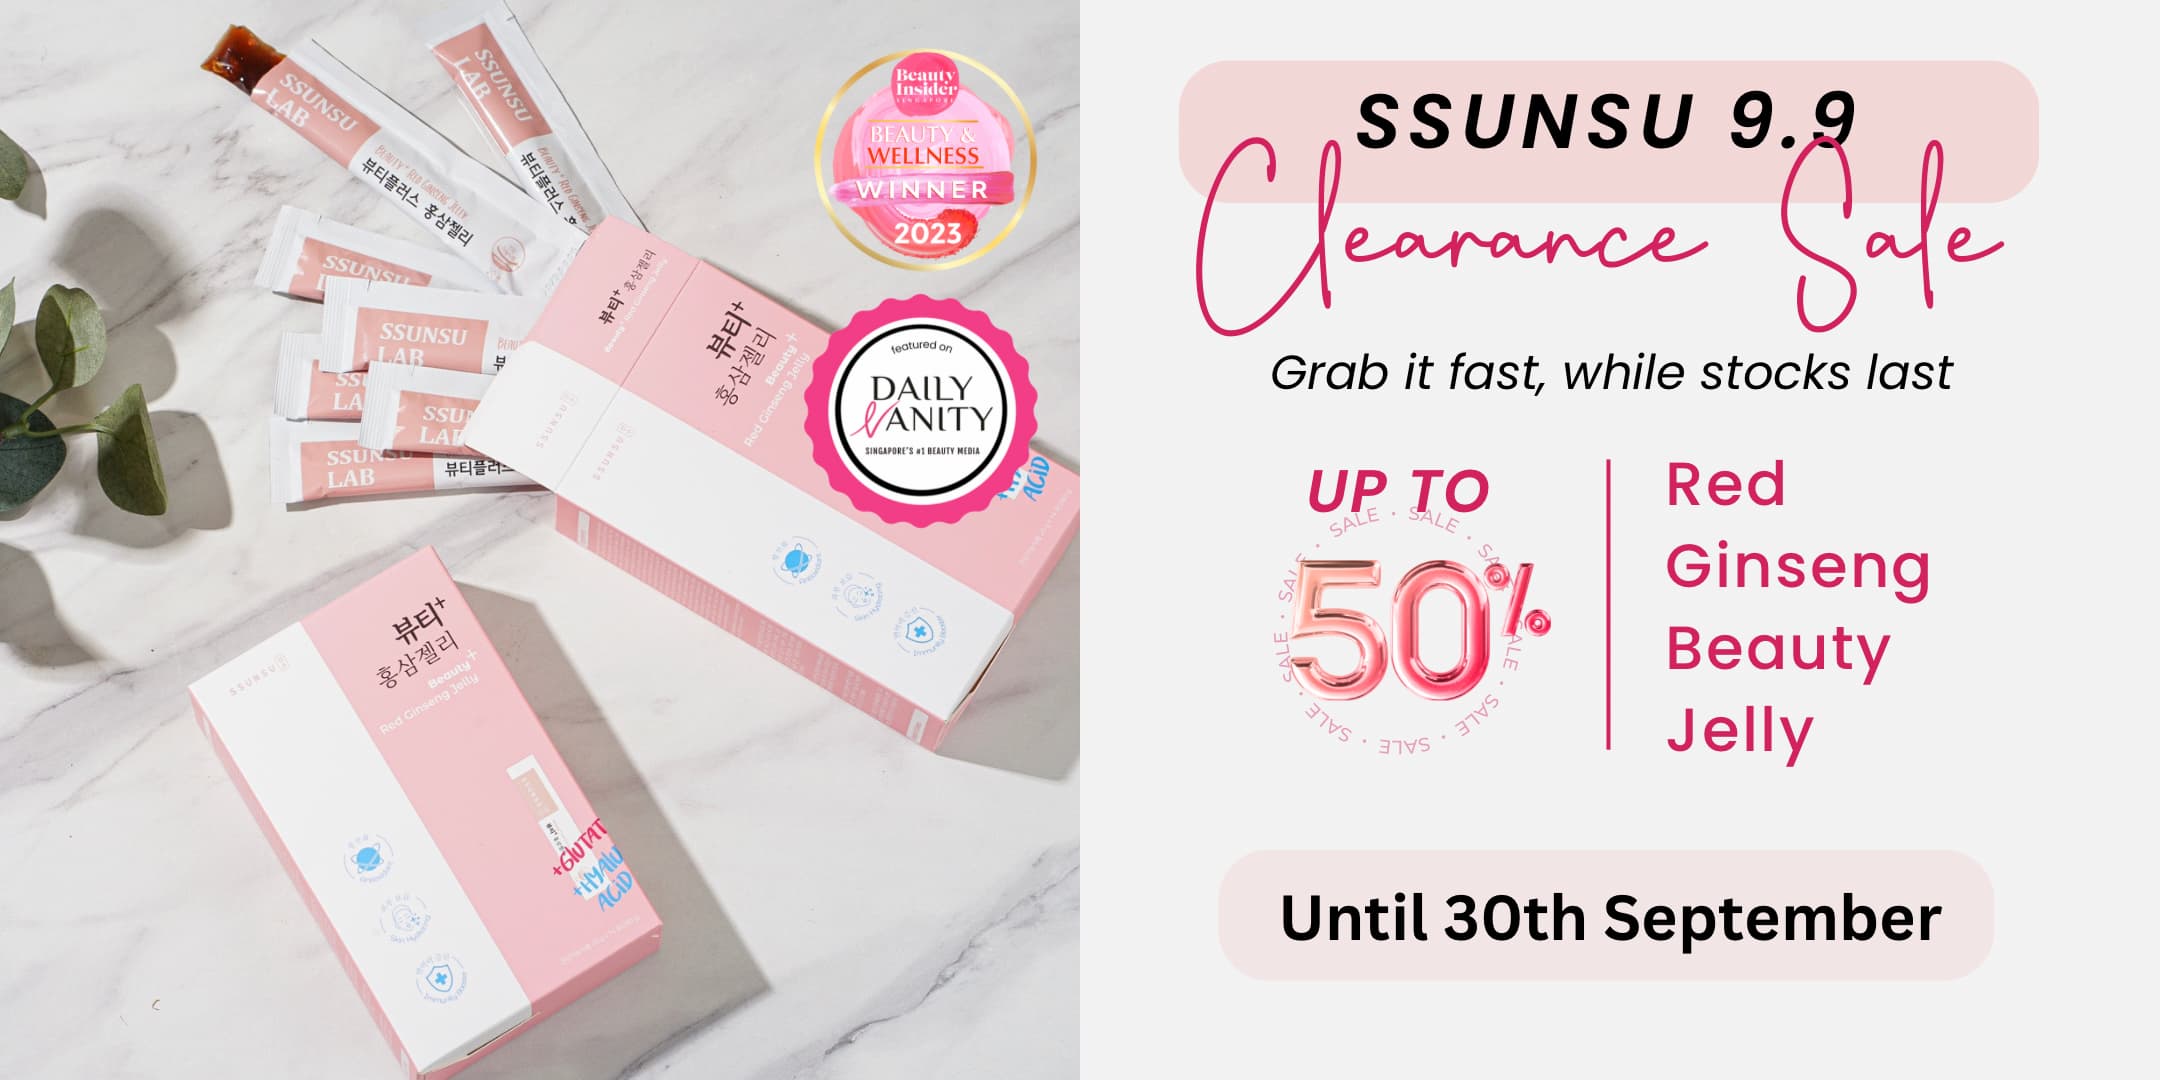 SSUNSU 9.9 Clearance Sale now on! Until 30th September